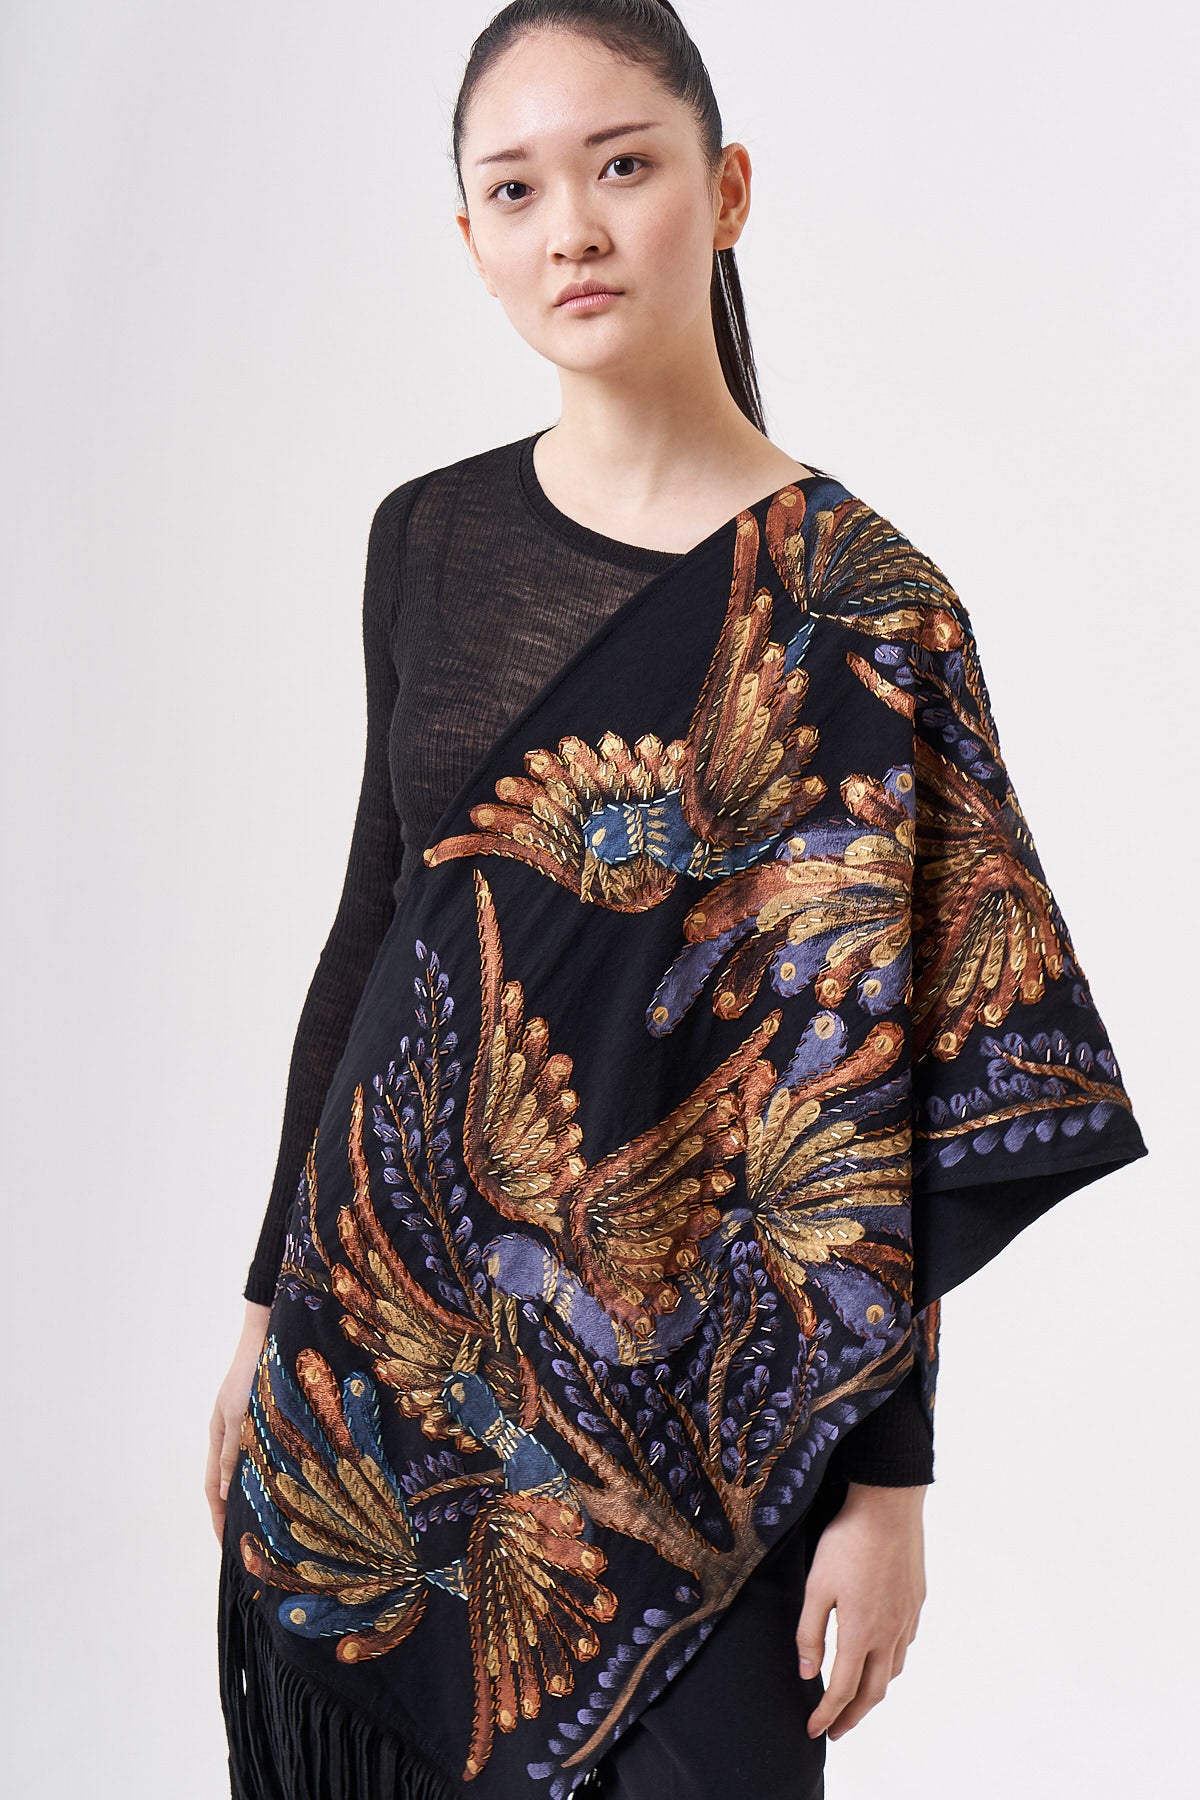 HAND-PAINTED AND HAND-EMBROIDERED SHAWL WITH SUEDE FRINGE